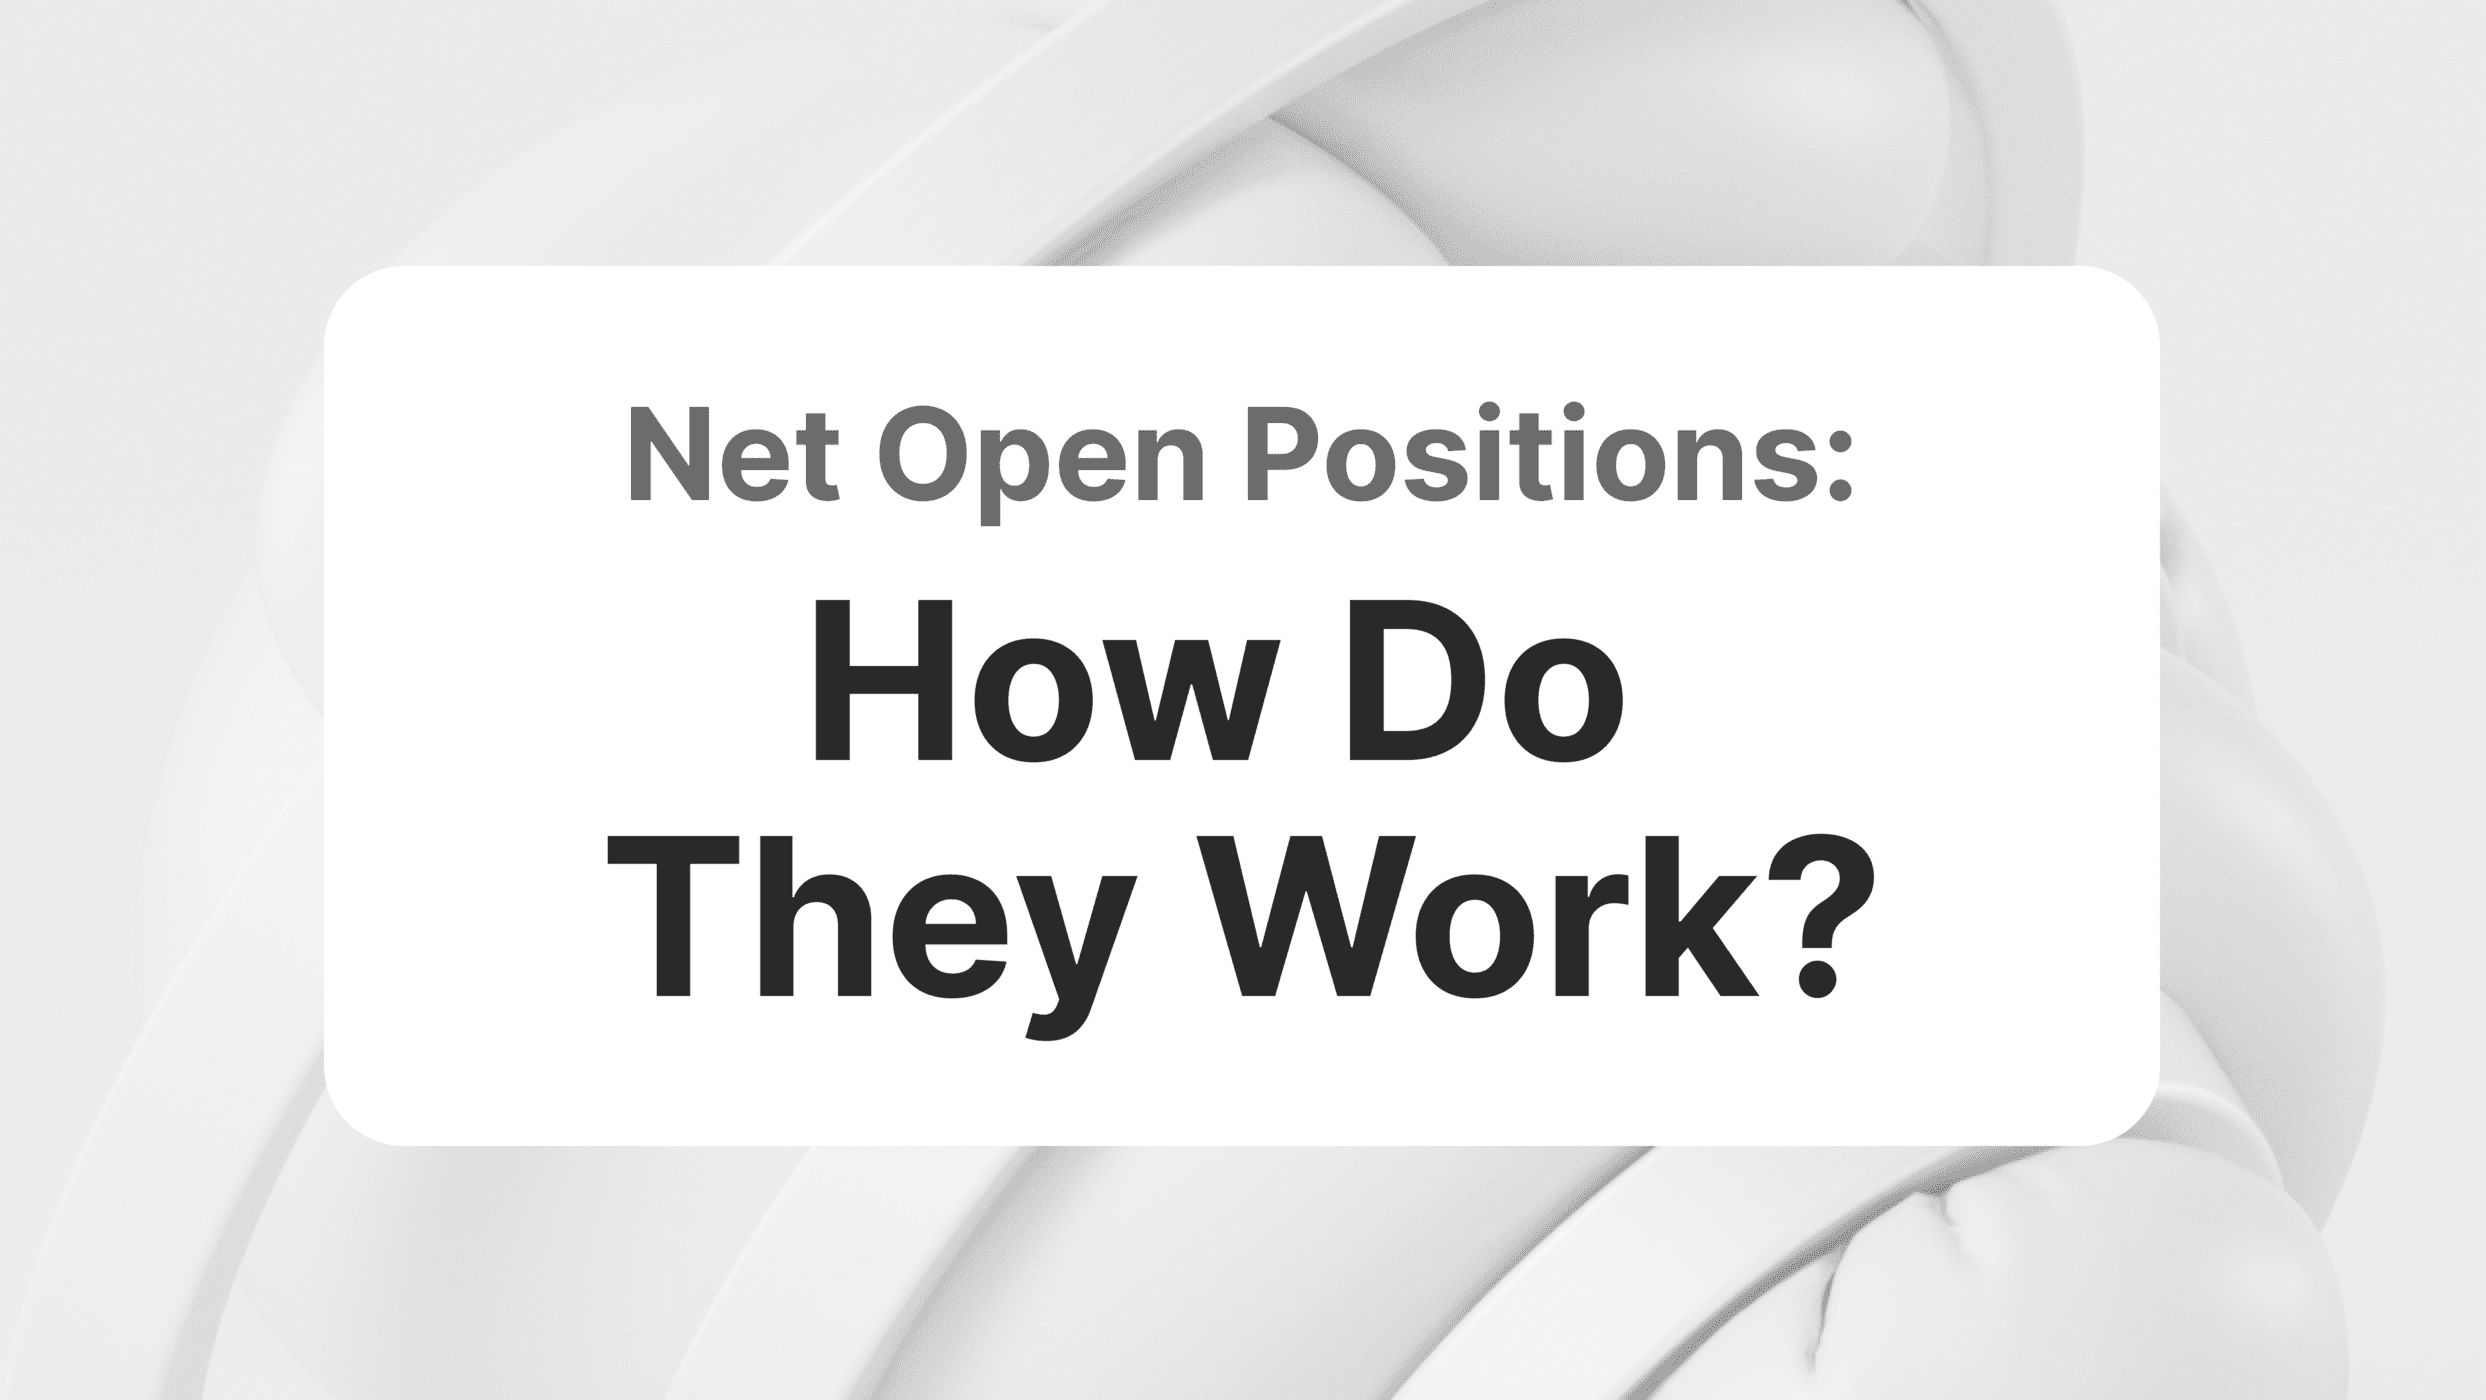 How Do Net Open Position Limits Promote Market Stability?